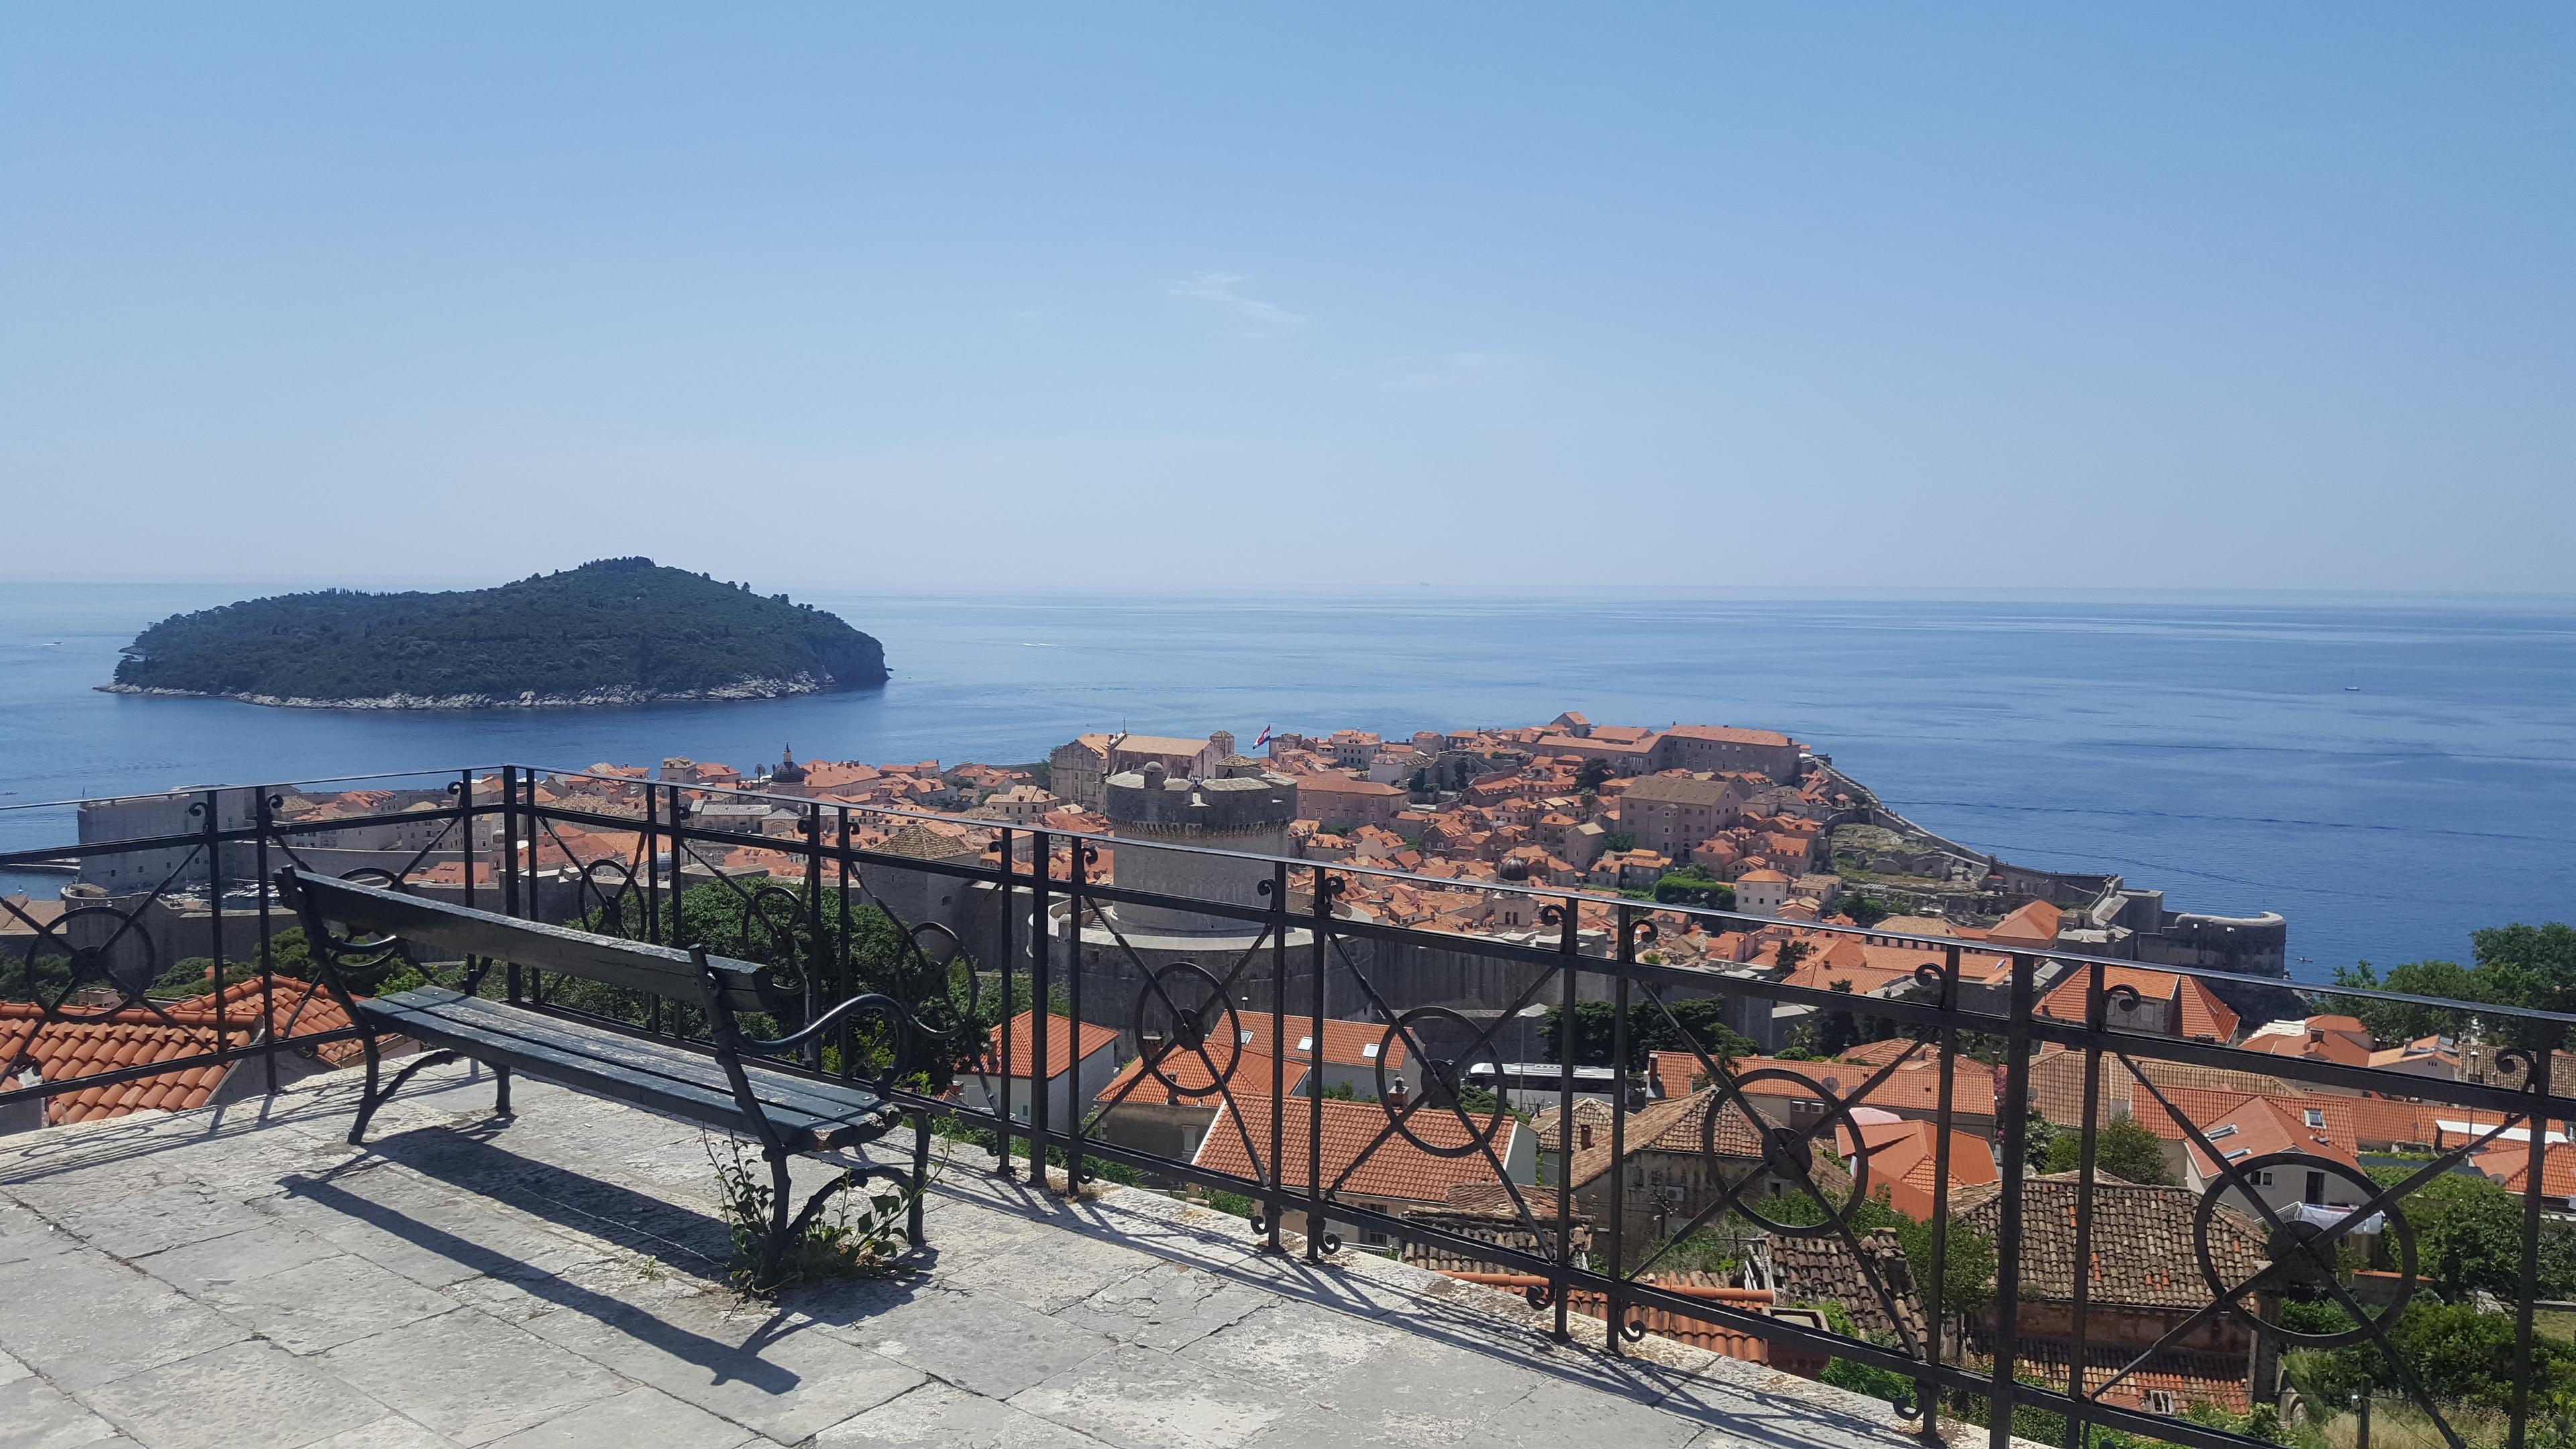 Cover image of this place Depozit Dubrovnik